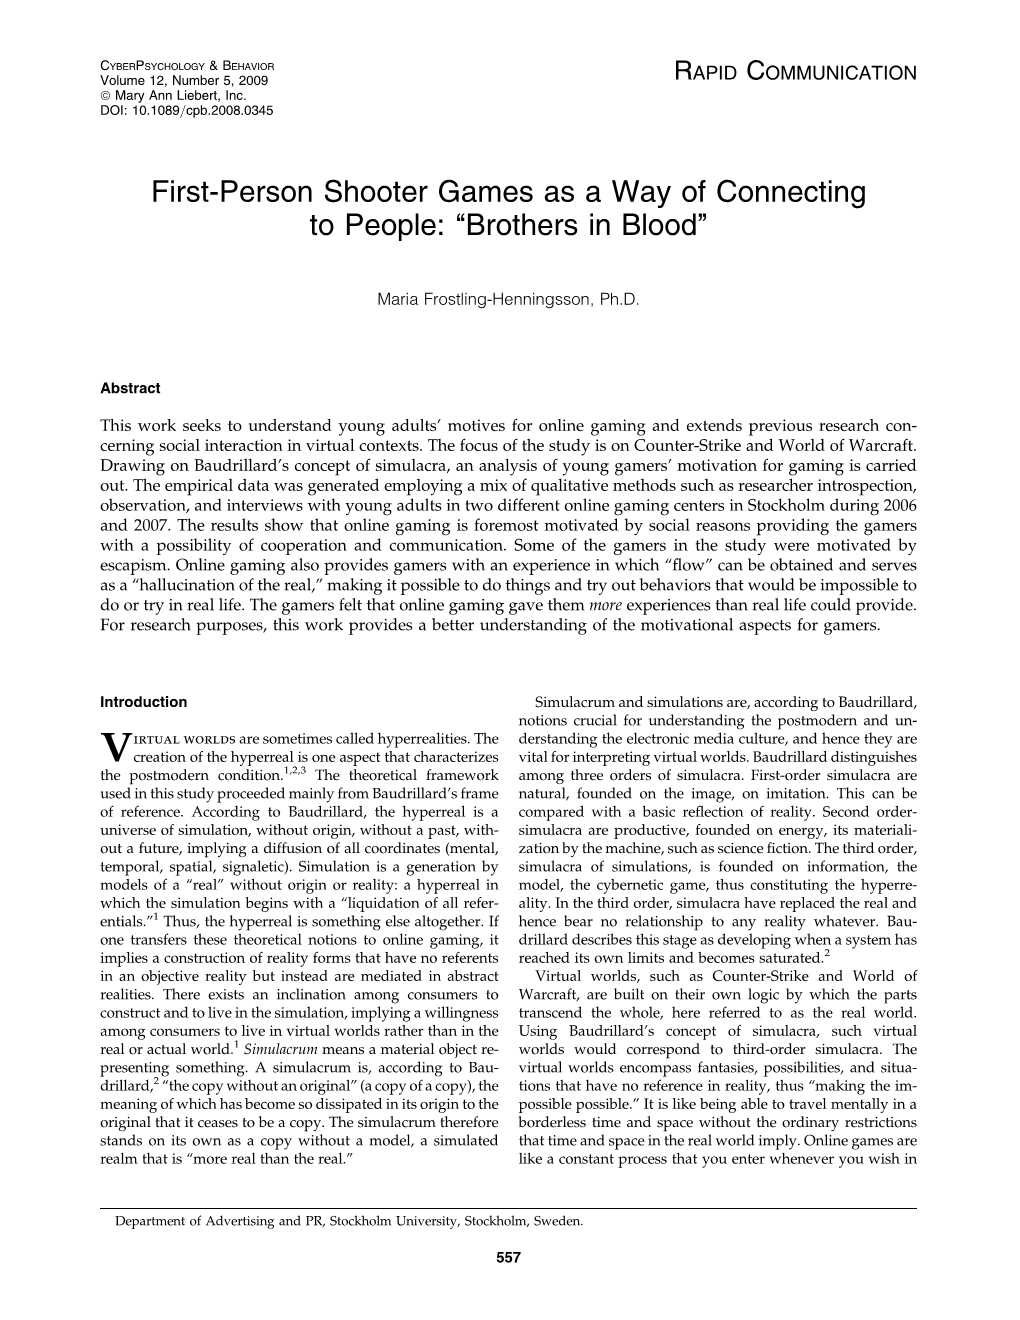 First-Person Shooter Games As a Way of Connecting to People: ‘‘Brothers in Blood’’